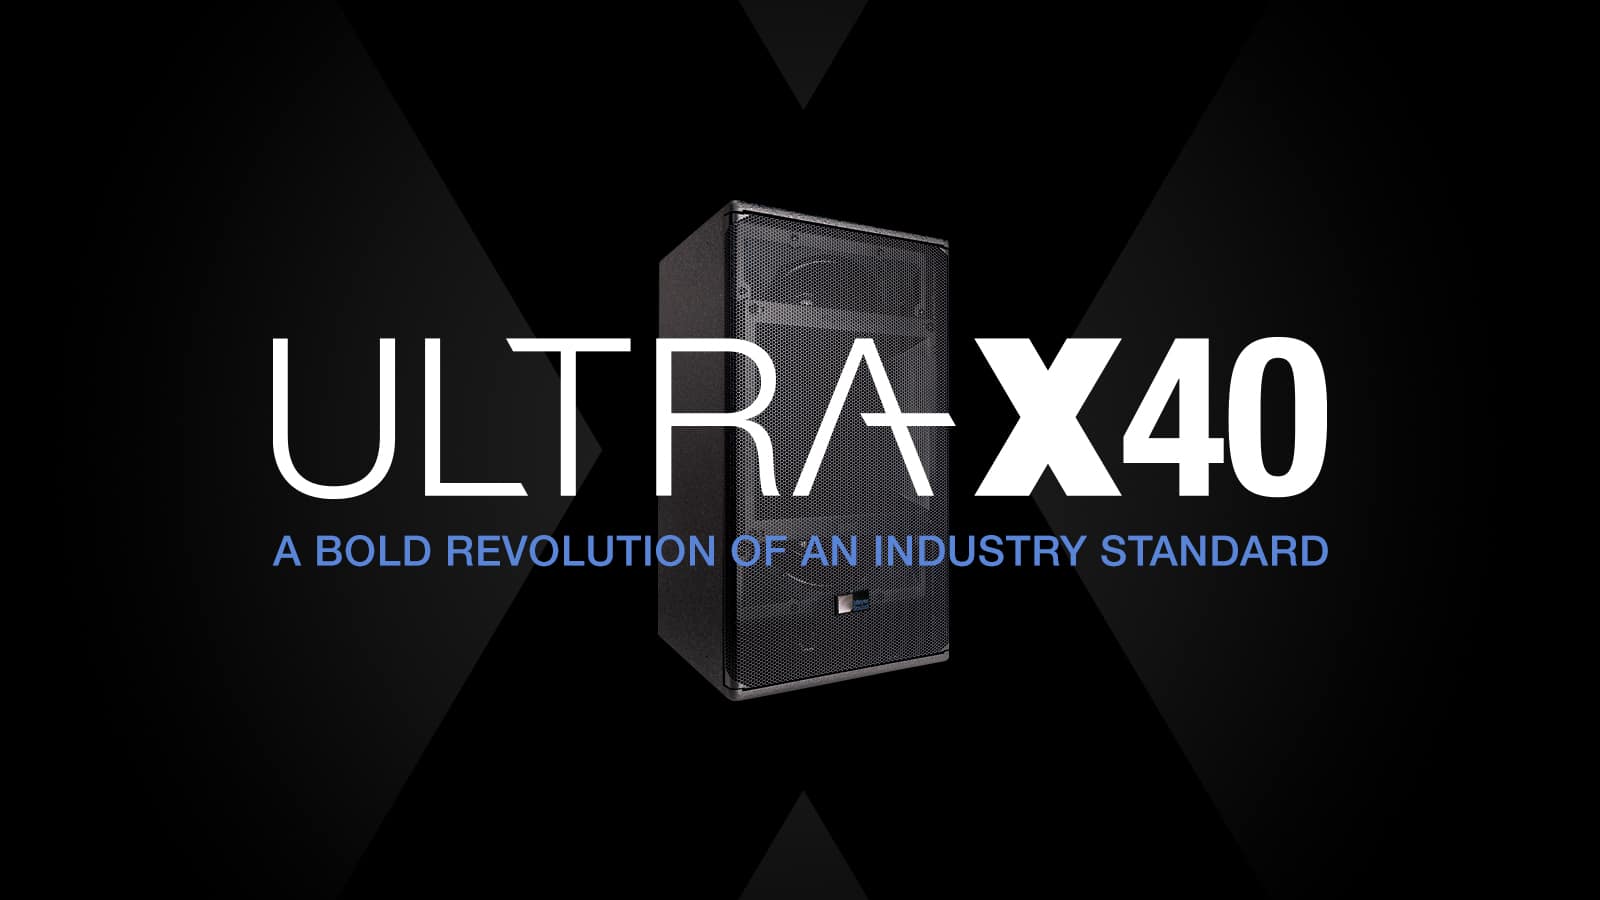 Meyer Sound ULTRA-X40 Point Source Loudspeaker Earns Accolades Across All Applications